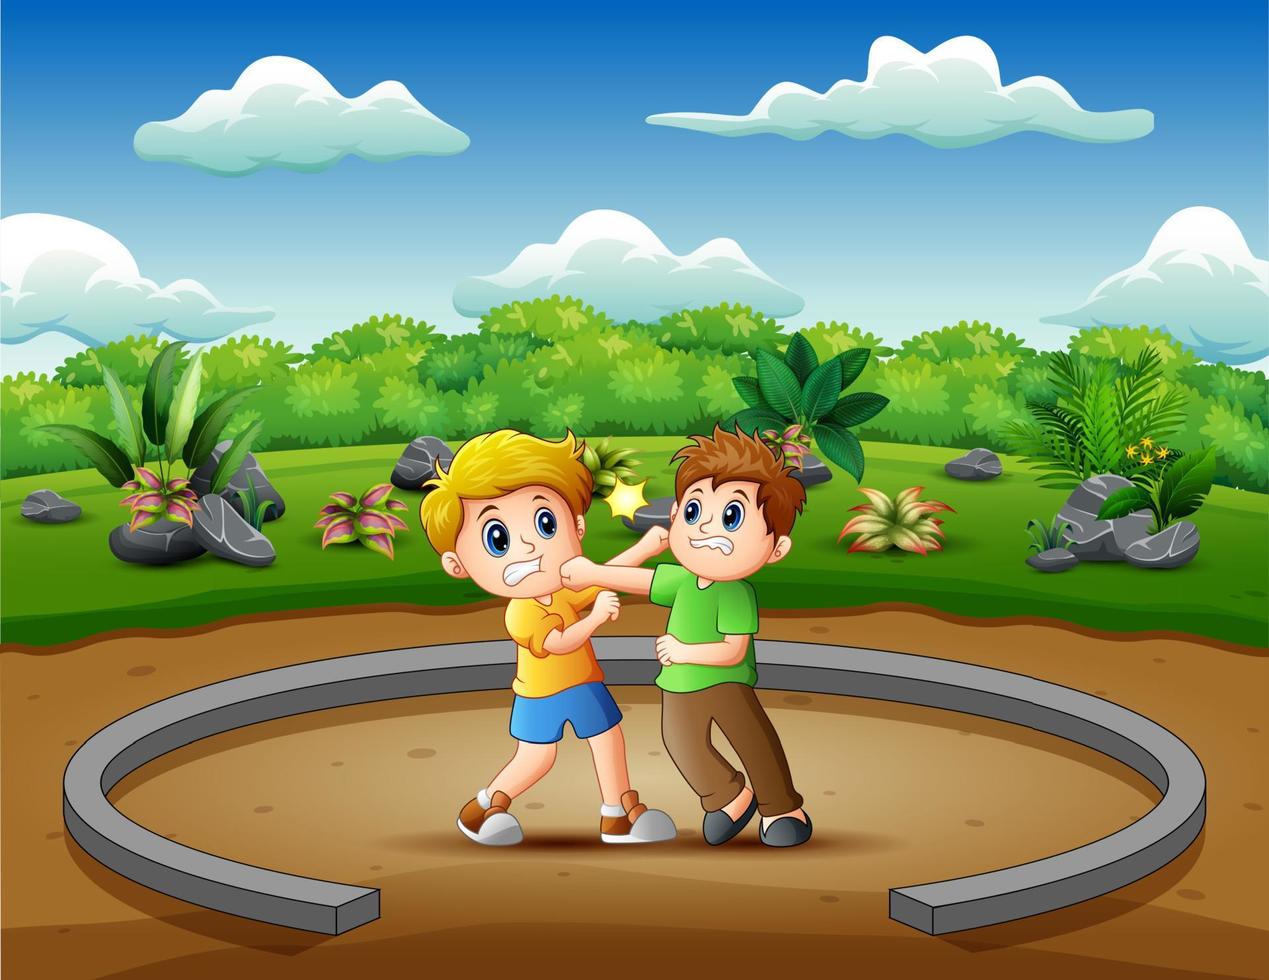 Cartoon of kids playing and fighting illustration vector